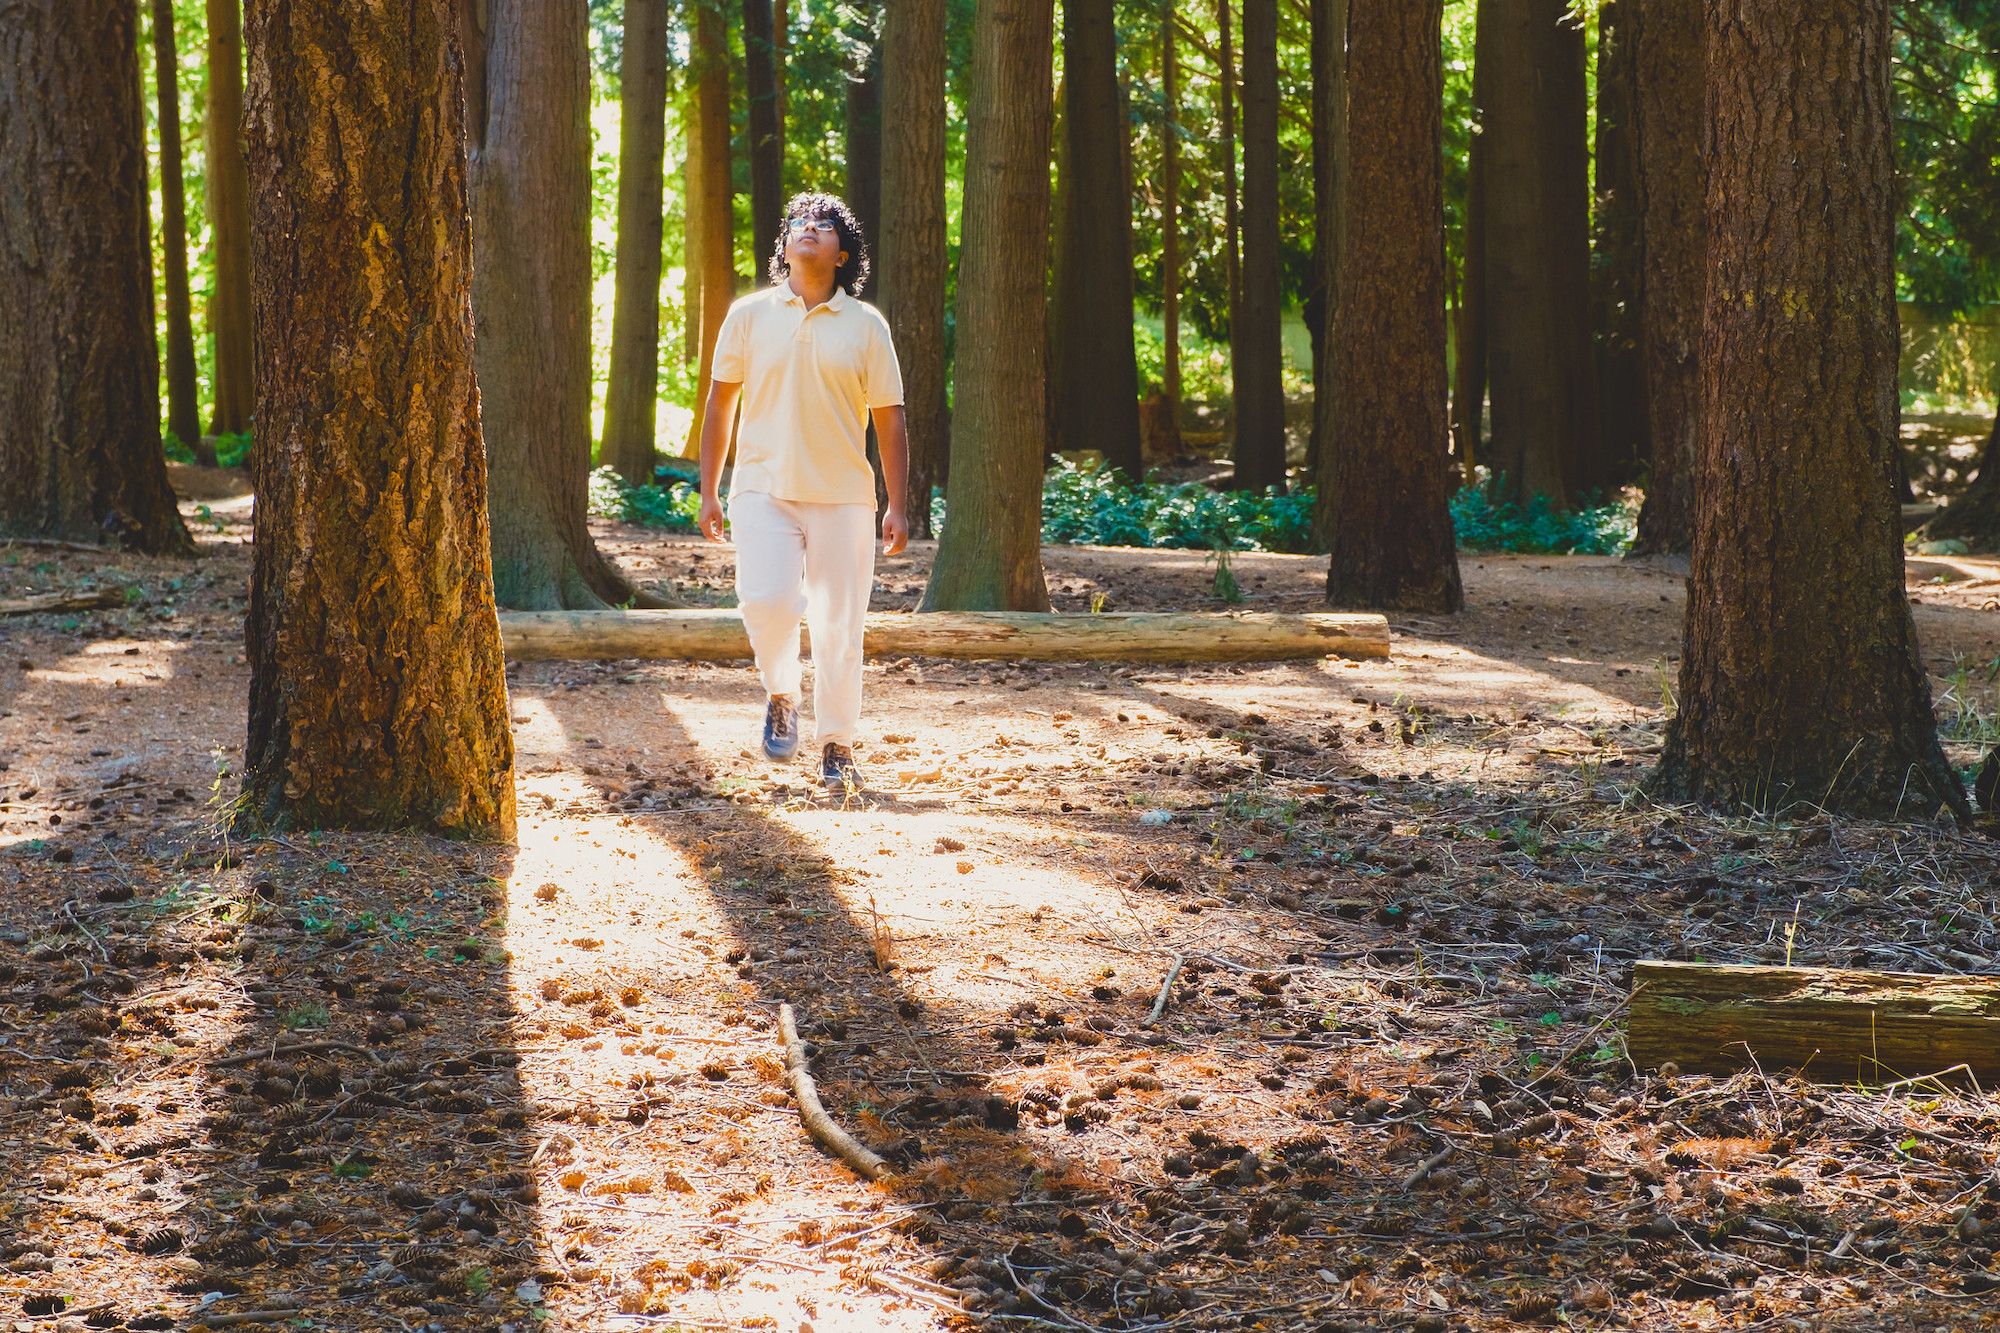 A South Asian student dressed in all white walking amongst pine trees on campus.